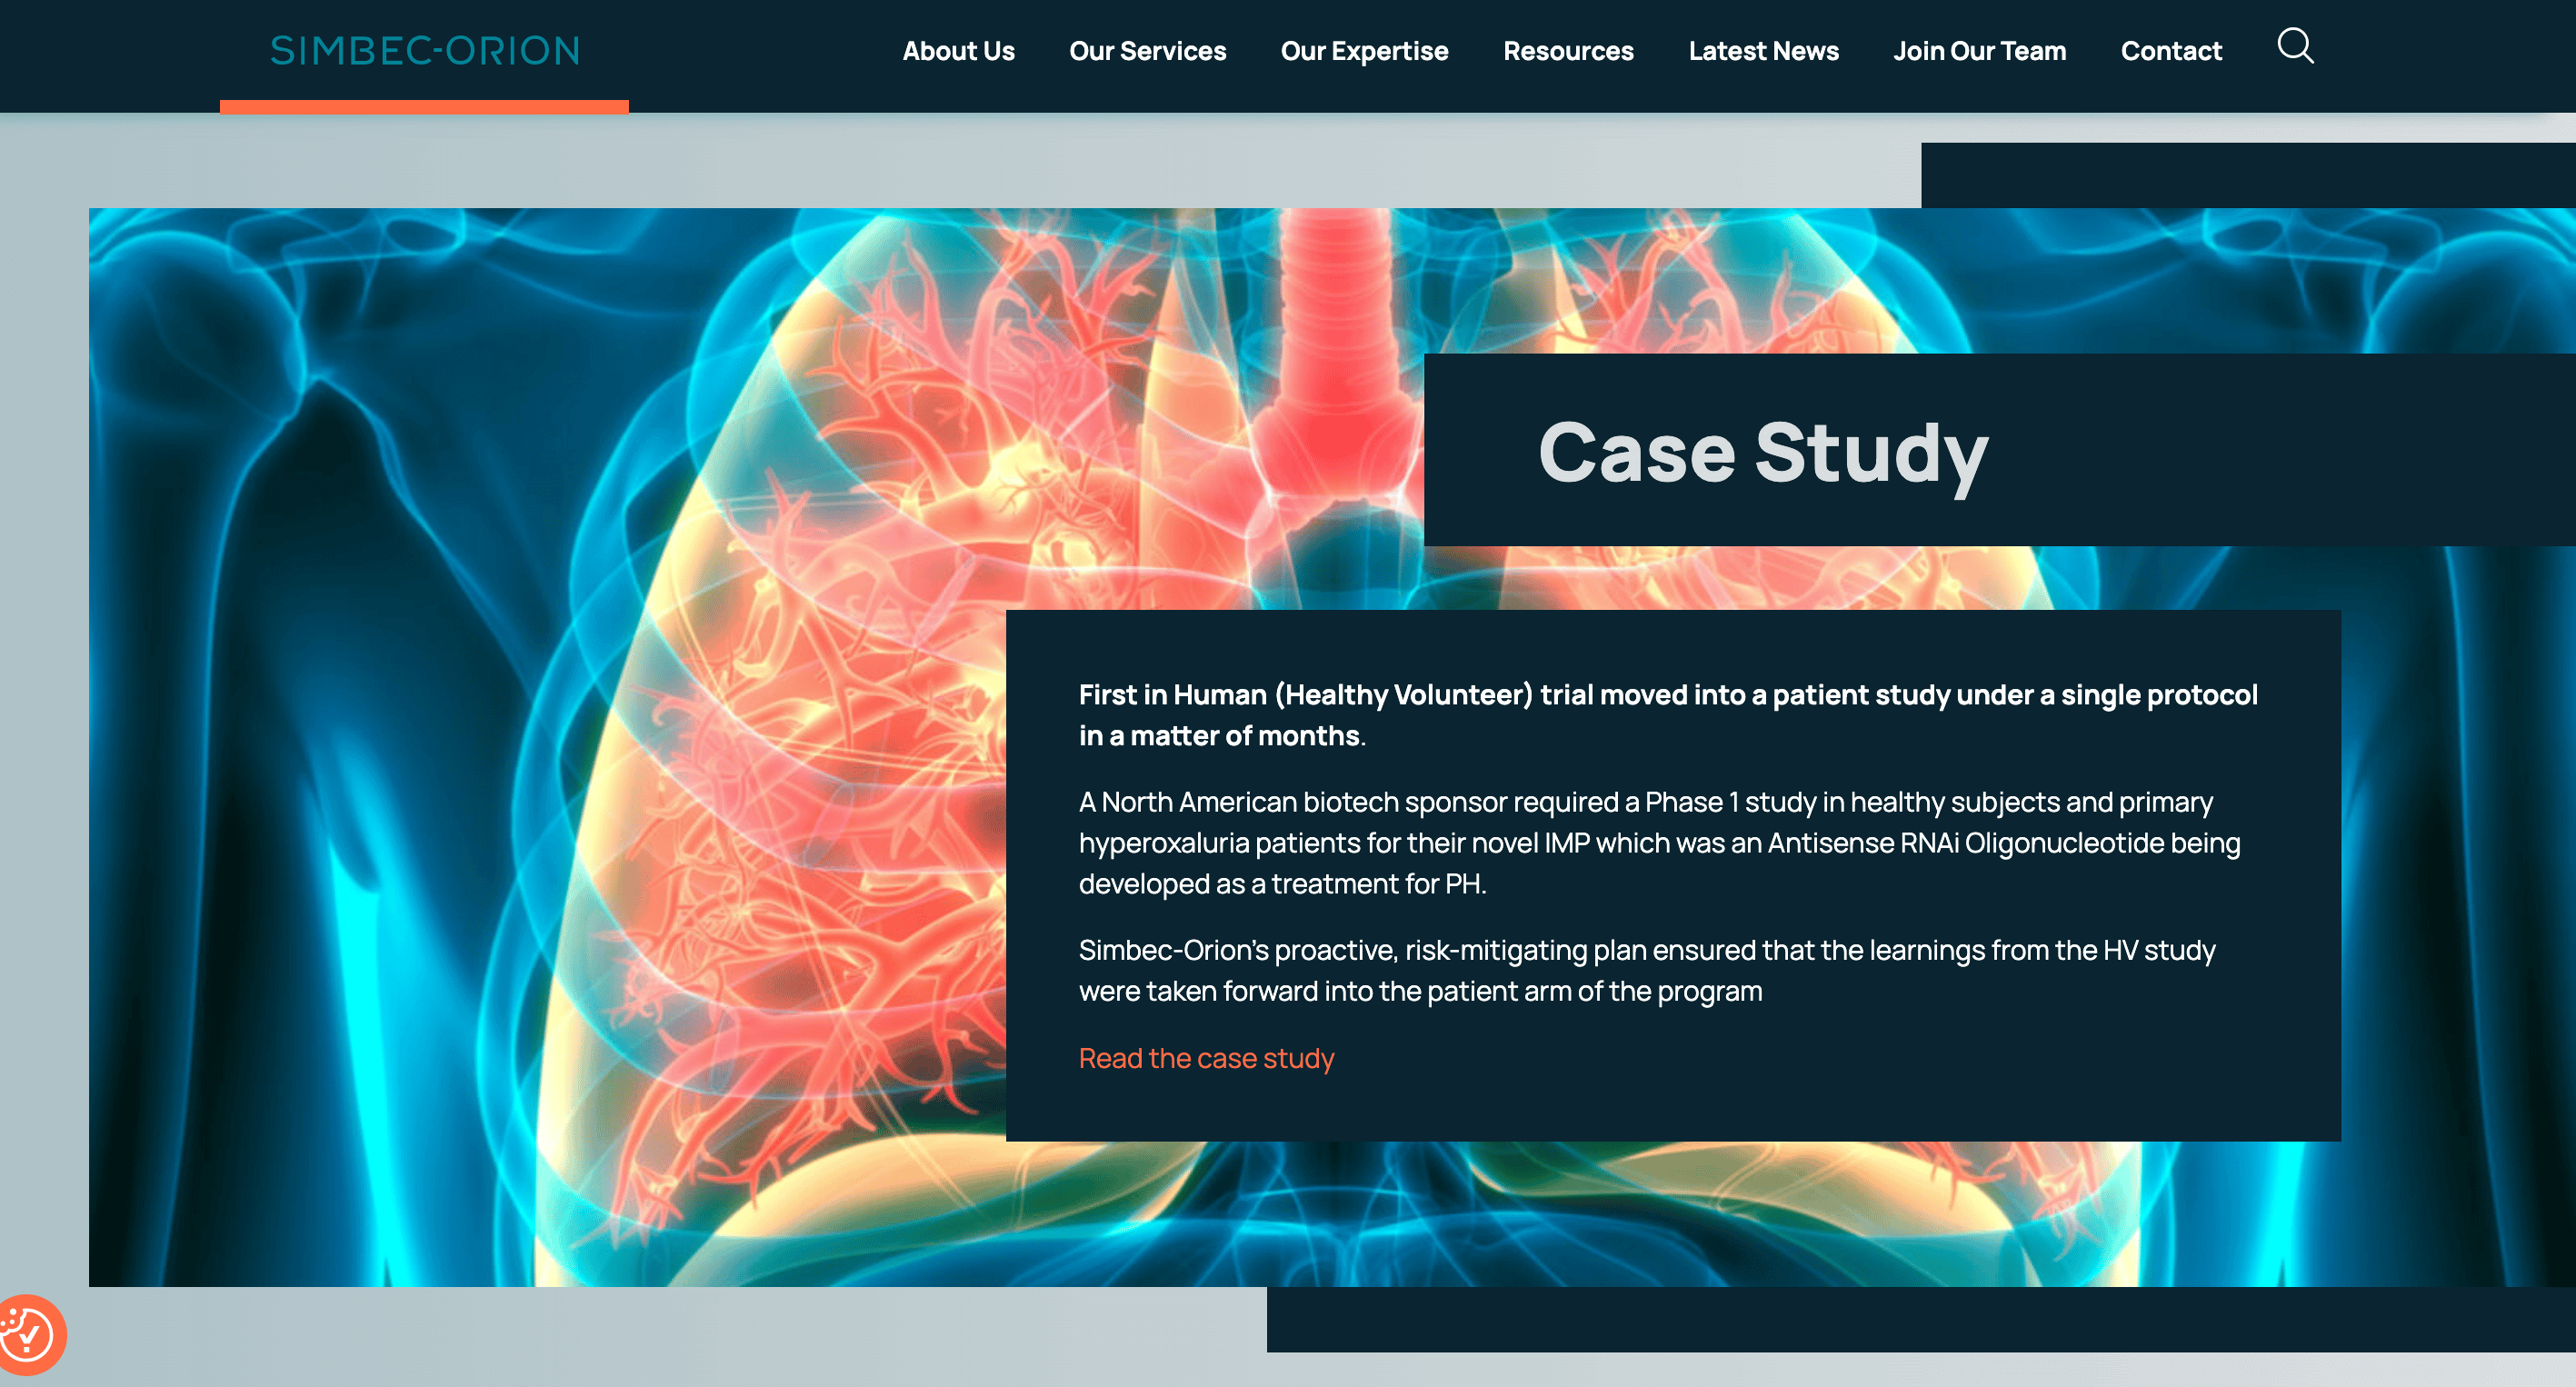 Simbec-Orion case study section